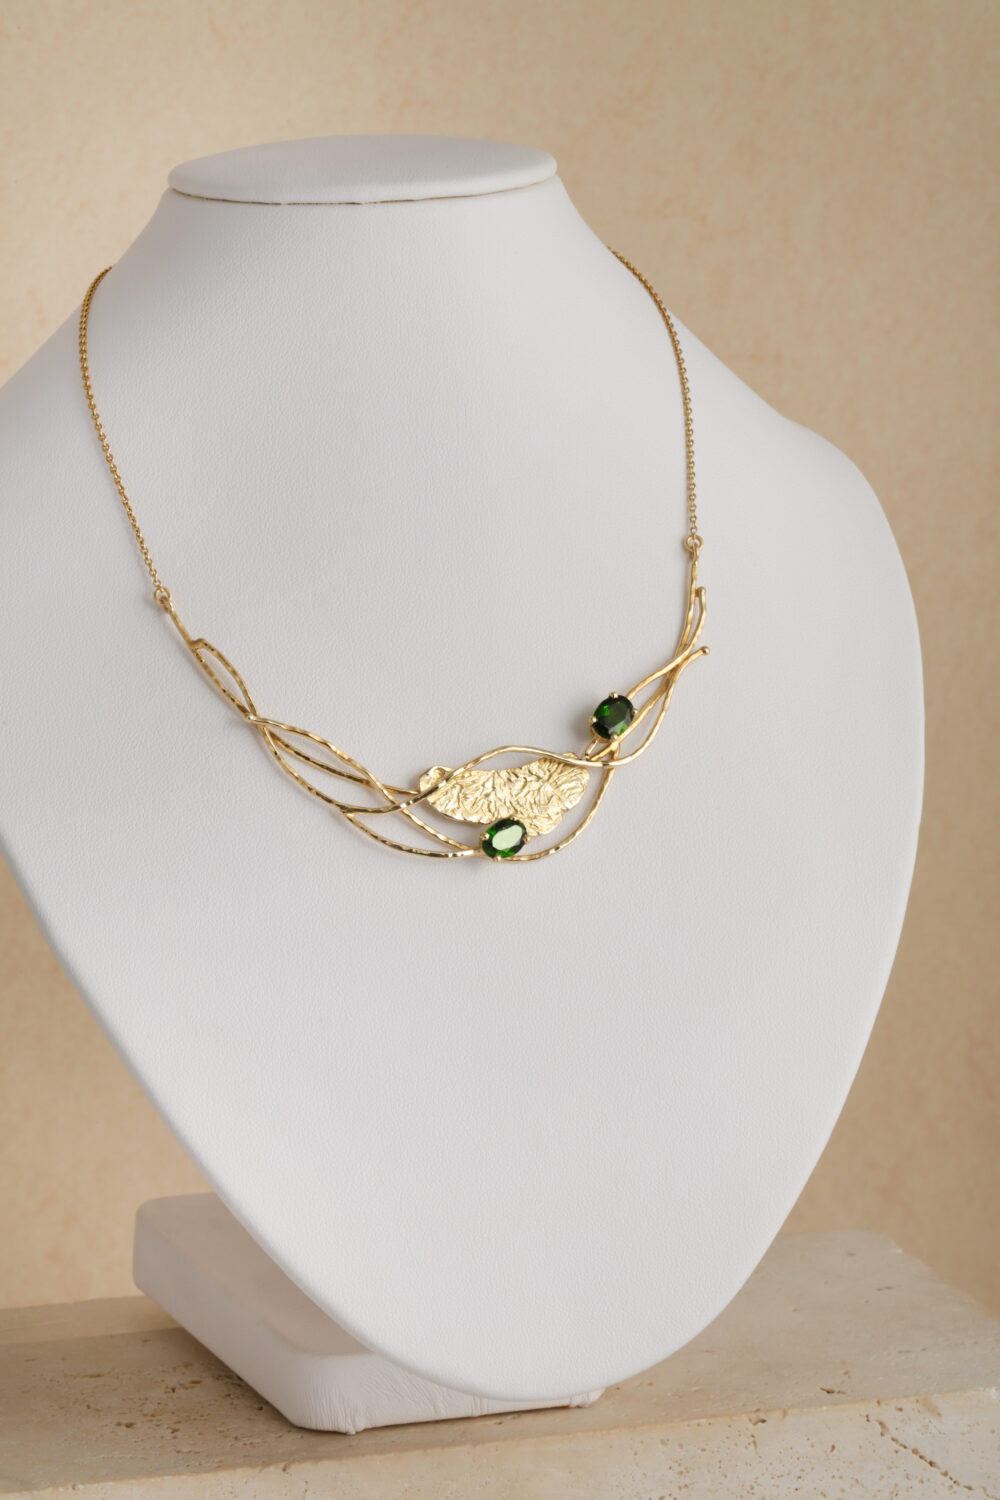 Necklace crafted from 18-karat yellow gold set with two oval cut green Diopsite gemstones.